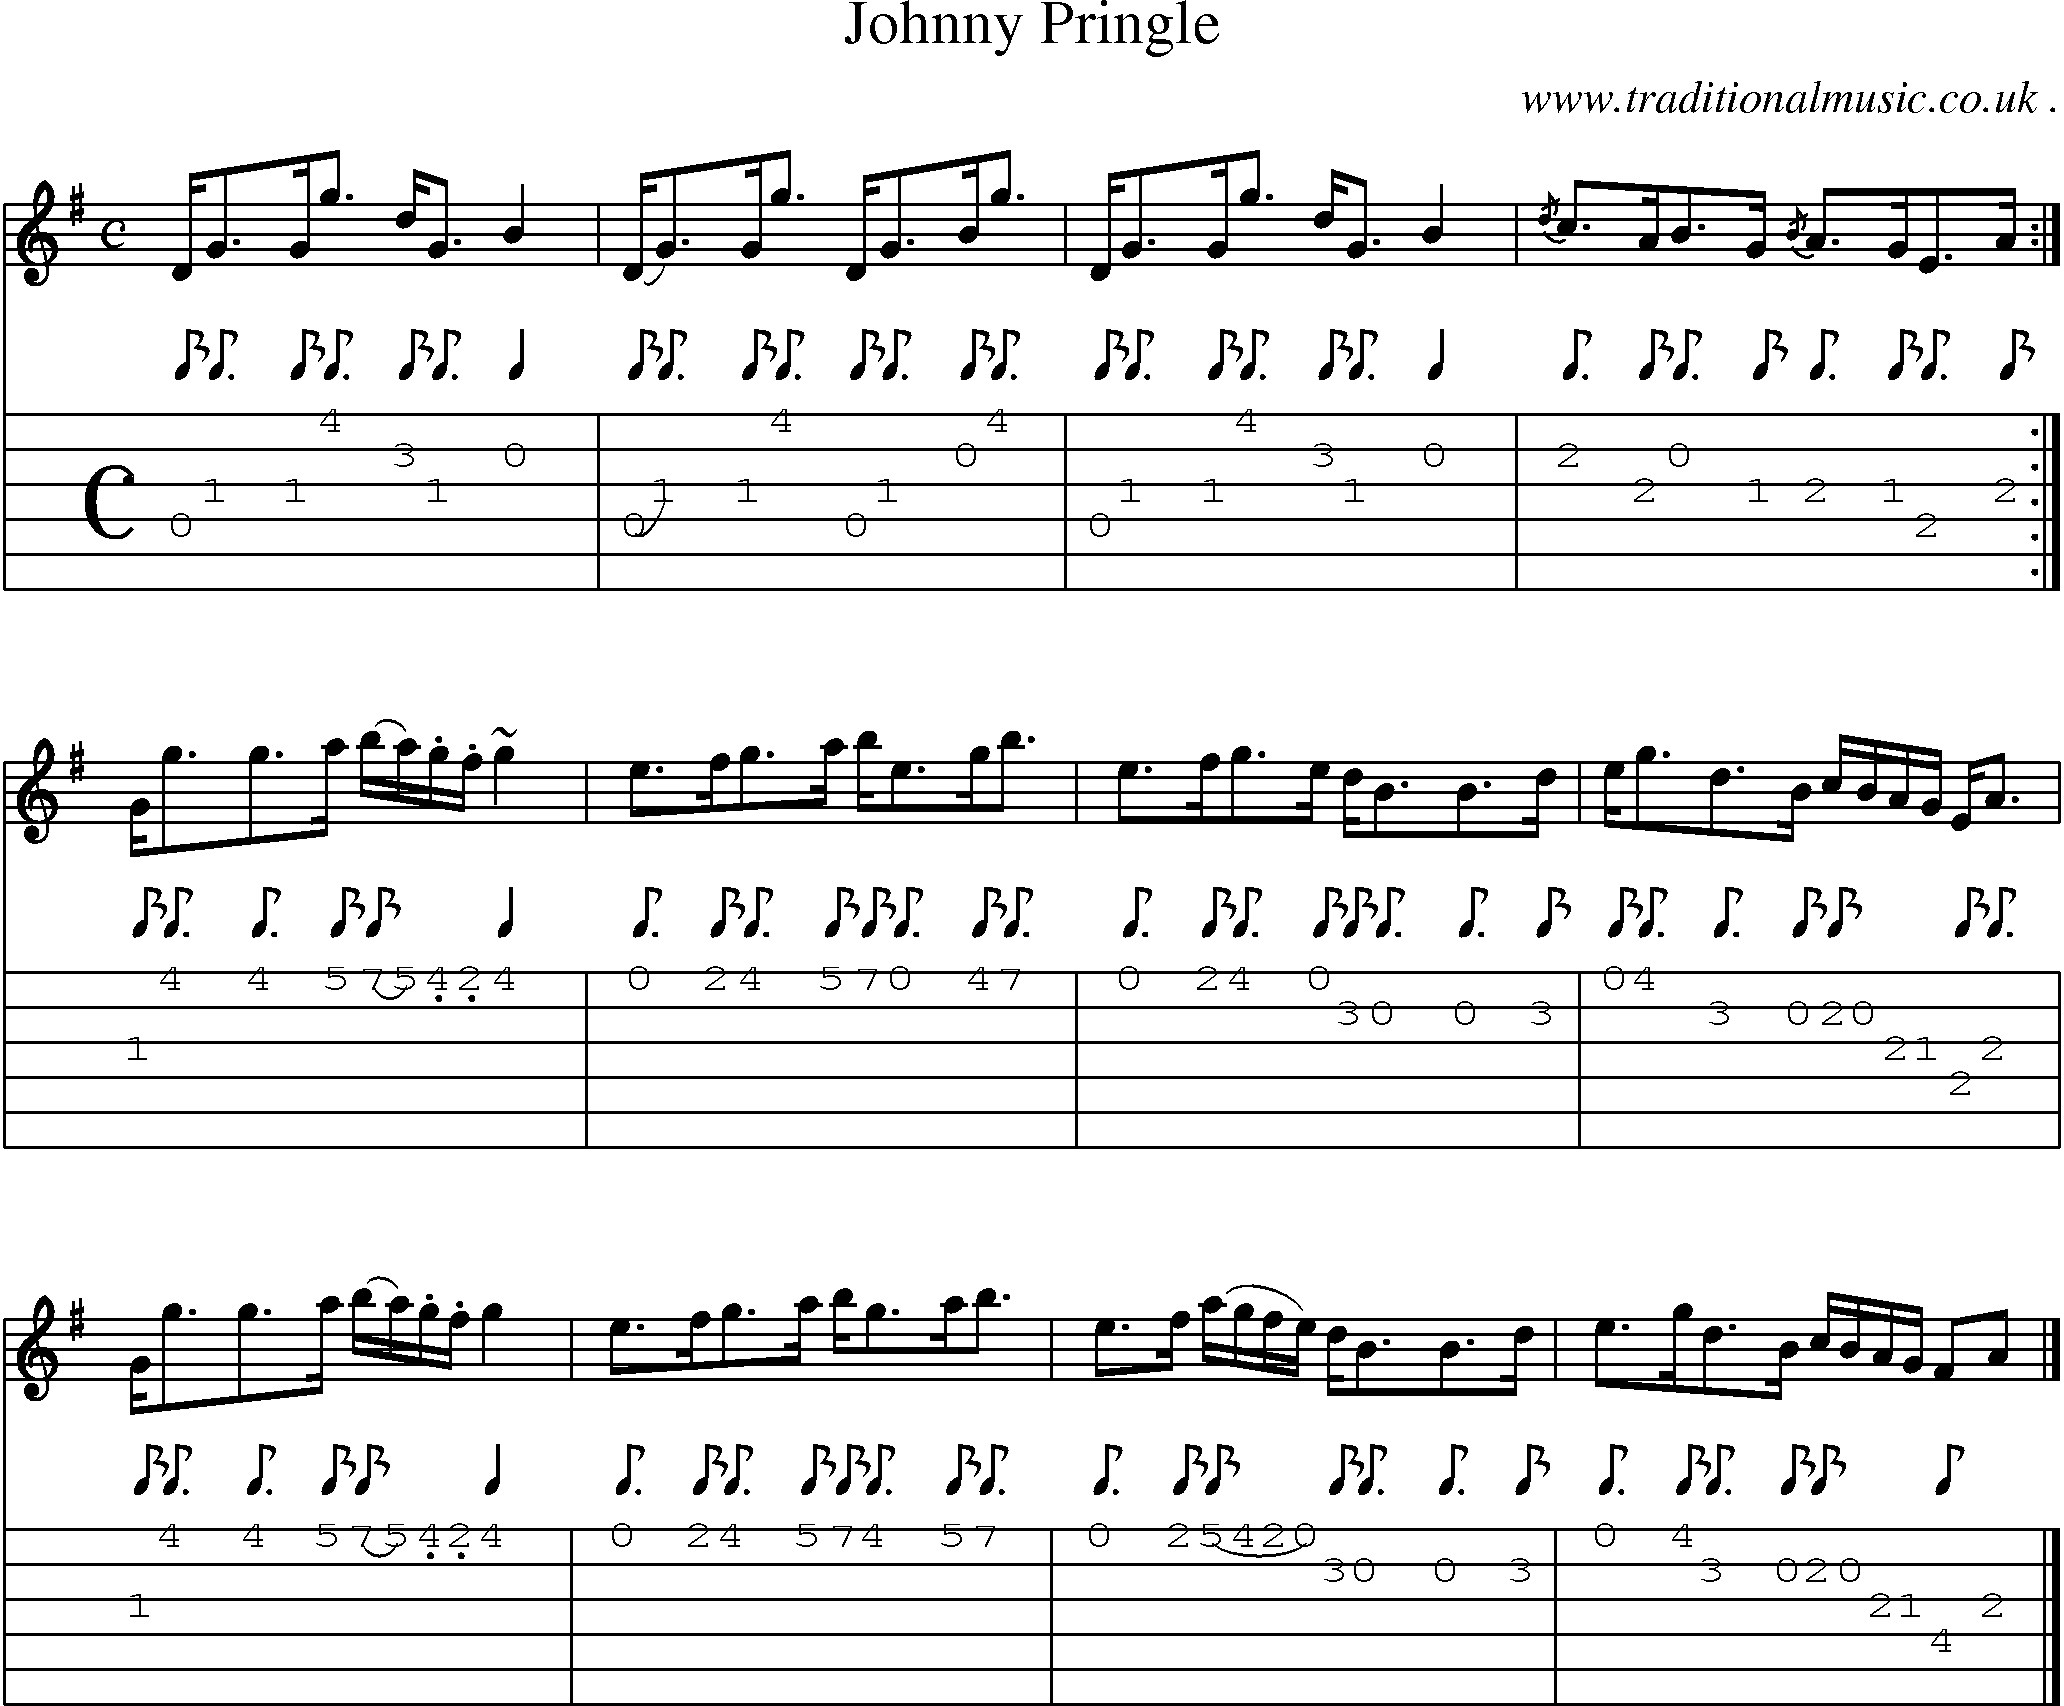 Sheet-music  score, Chords and Guitar Tabs for Johnny Pringle